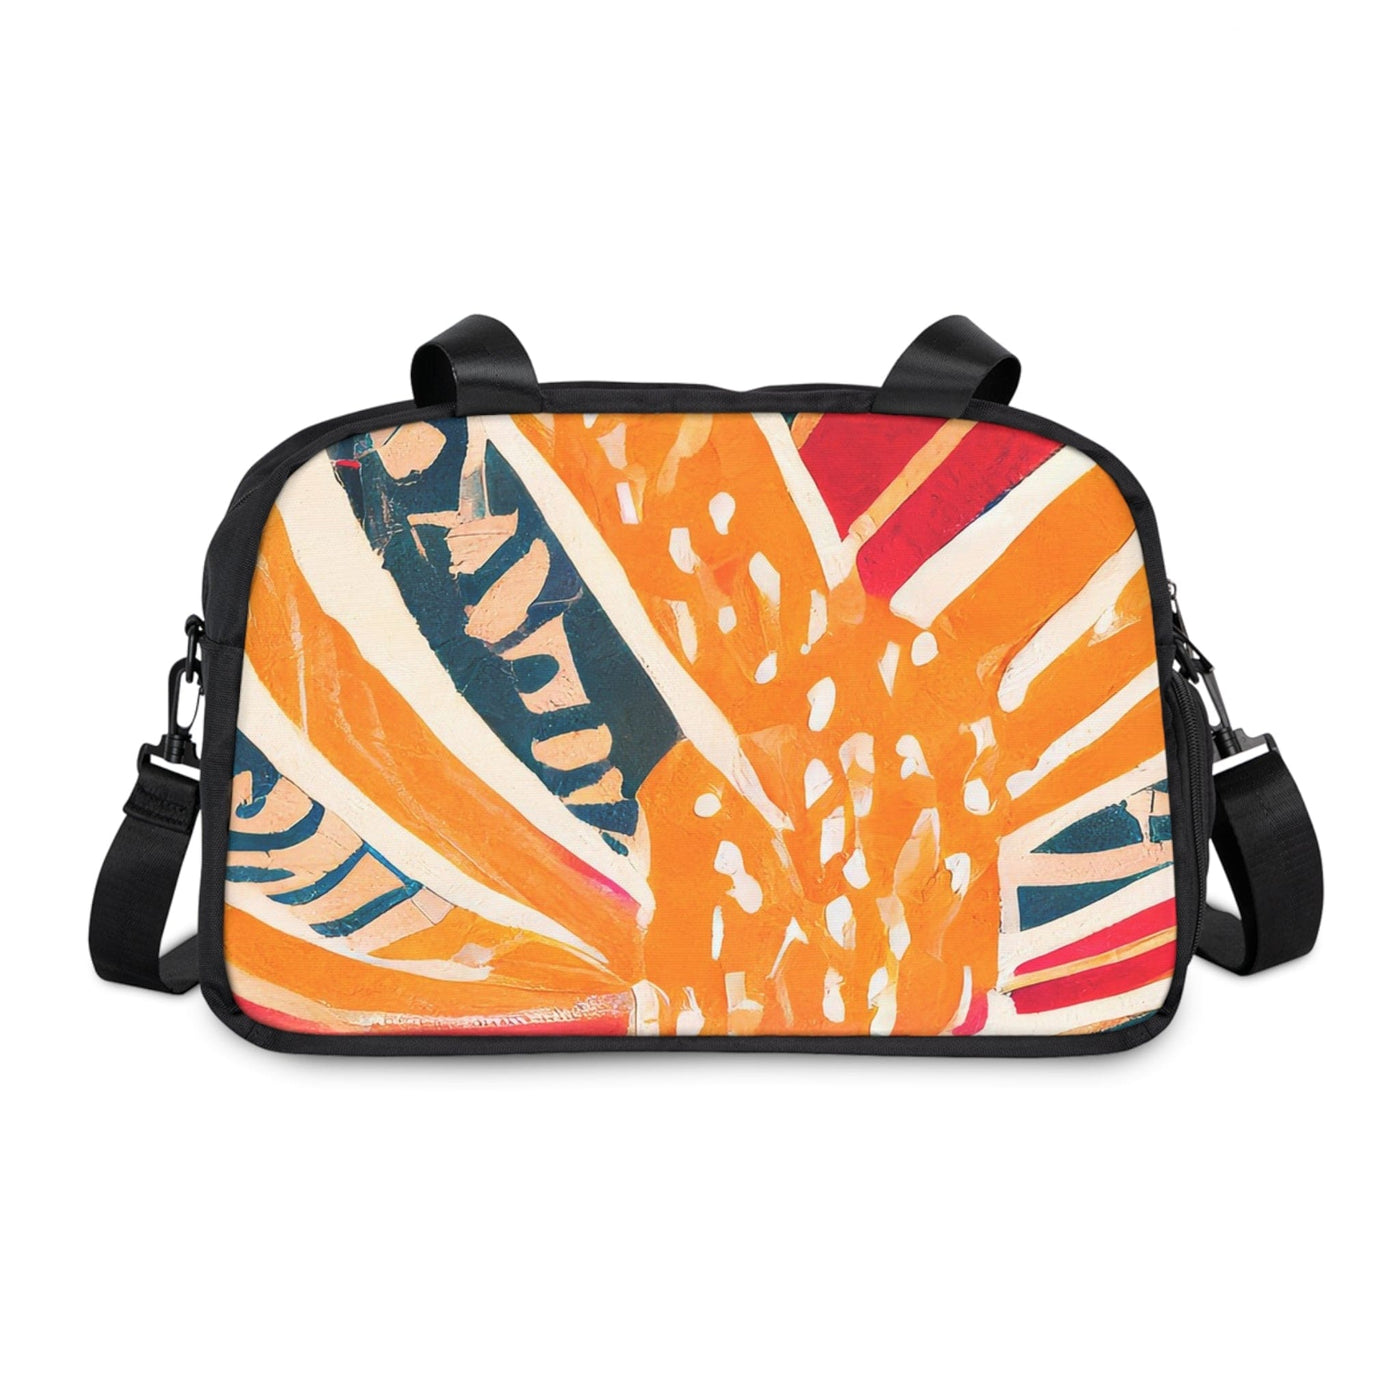 Travel Fitness Bag Boho Abstract Vibrant Multicolor Pattern 81826 - Bags